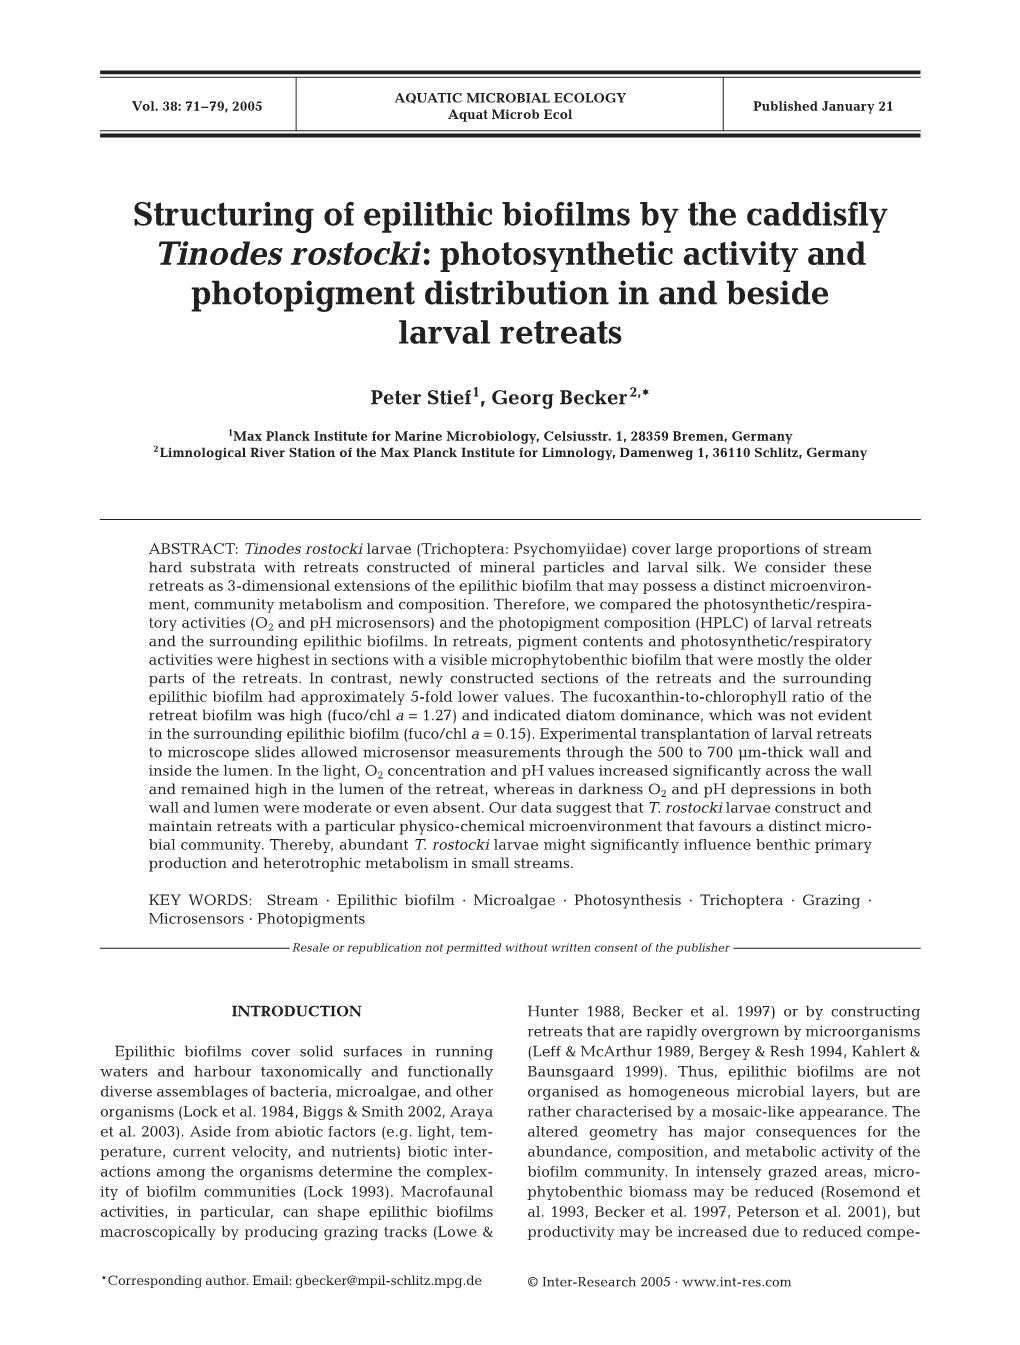 Structuring of Epilithic Biofilms by the Caddisfly Tinodes Rostocki: Photosynthetic Activity and Photopigment Distribution in and Beside Larval Retreats